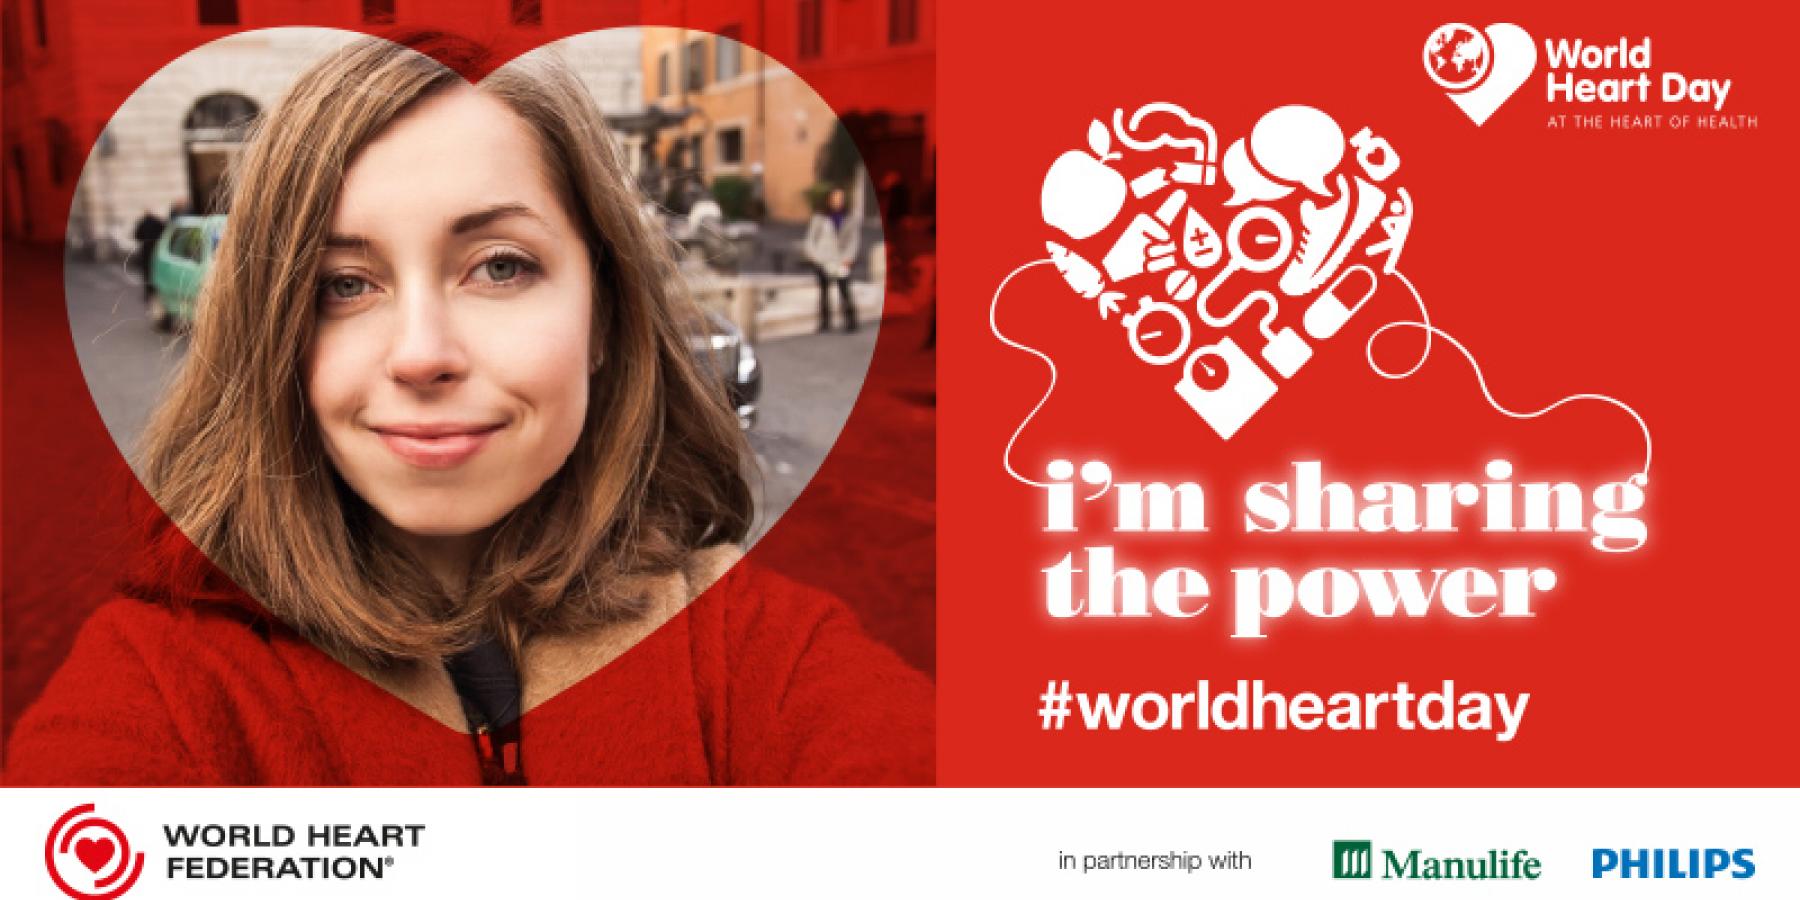 'I'm sharing the power' banner - World Heart Day 2017